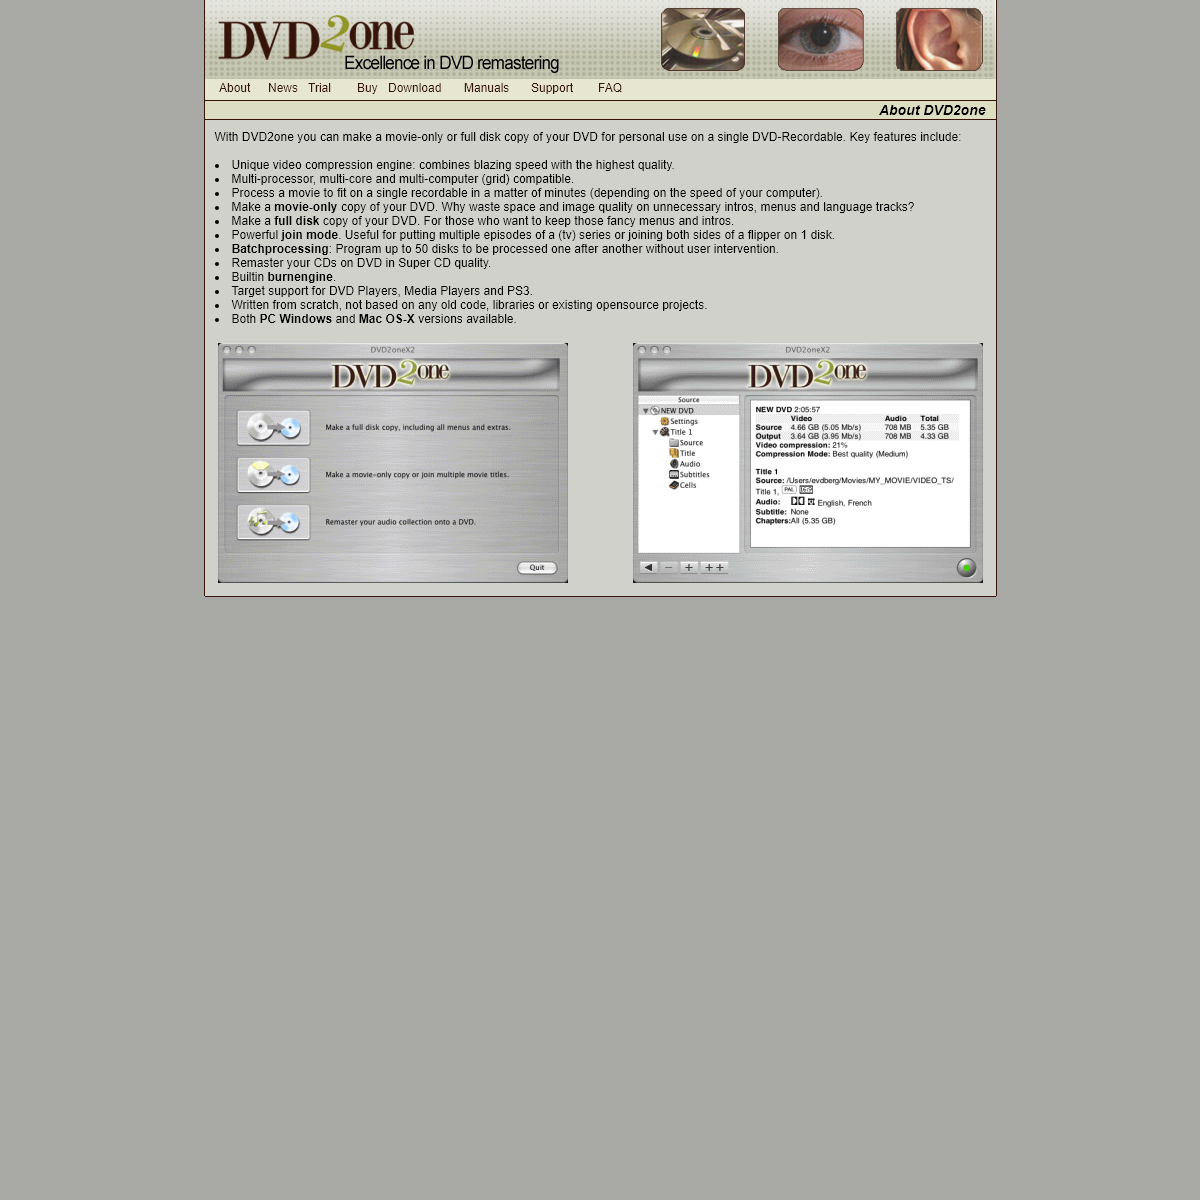 A complete backup of dvd2one.com